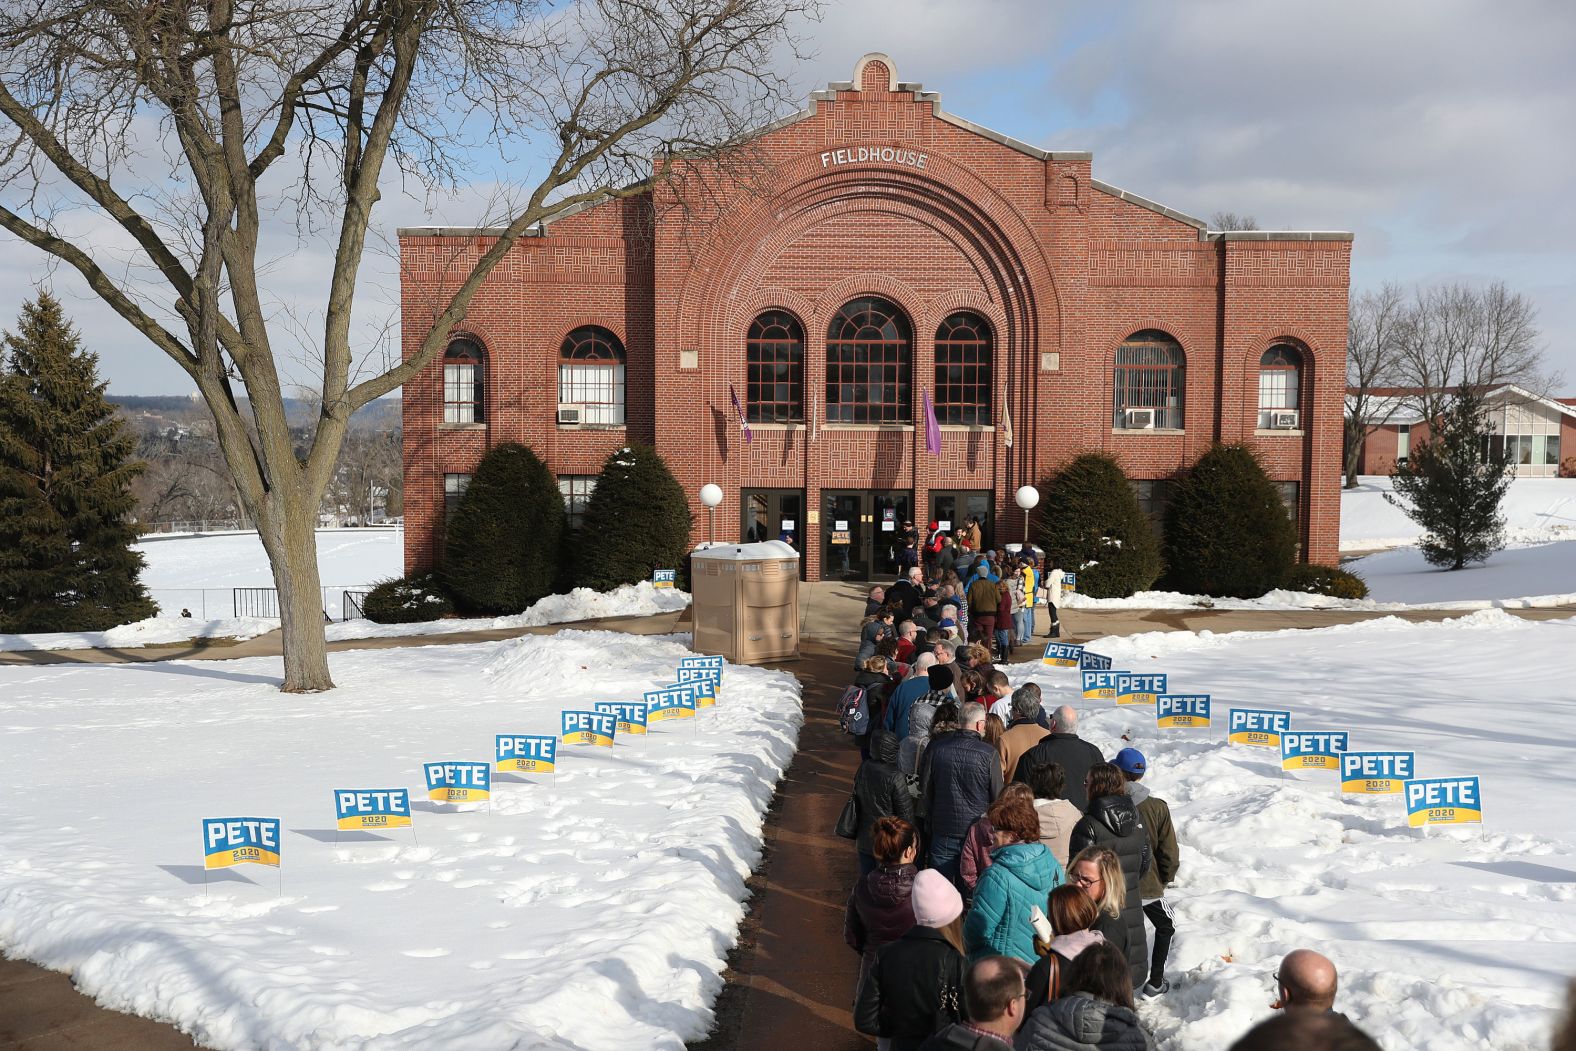 People line up to attend a Buttigieg event in Dubuque, Iowa, on February 1.